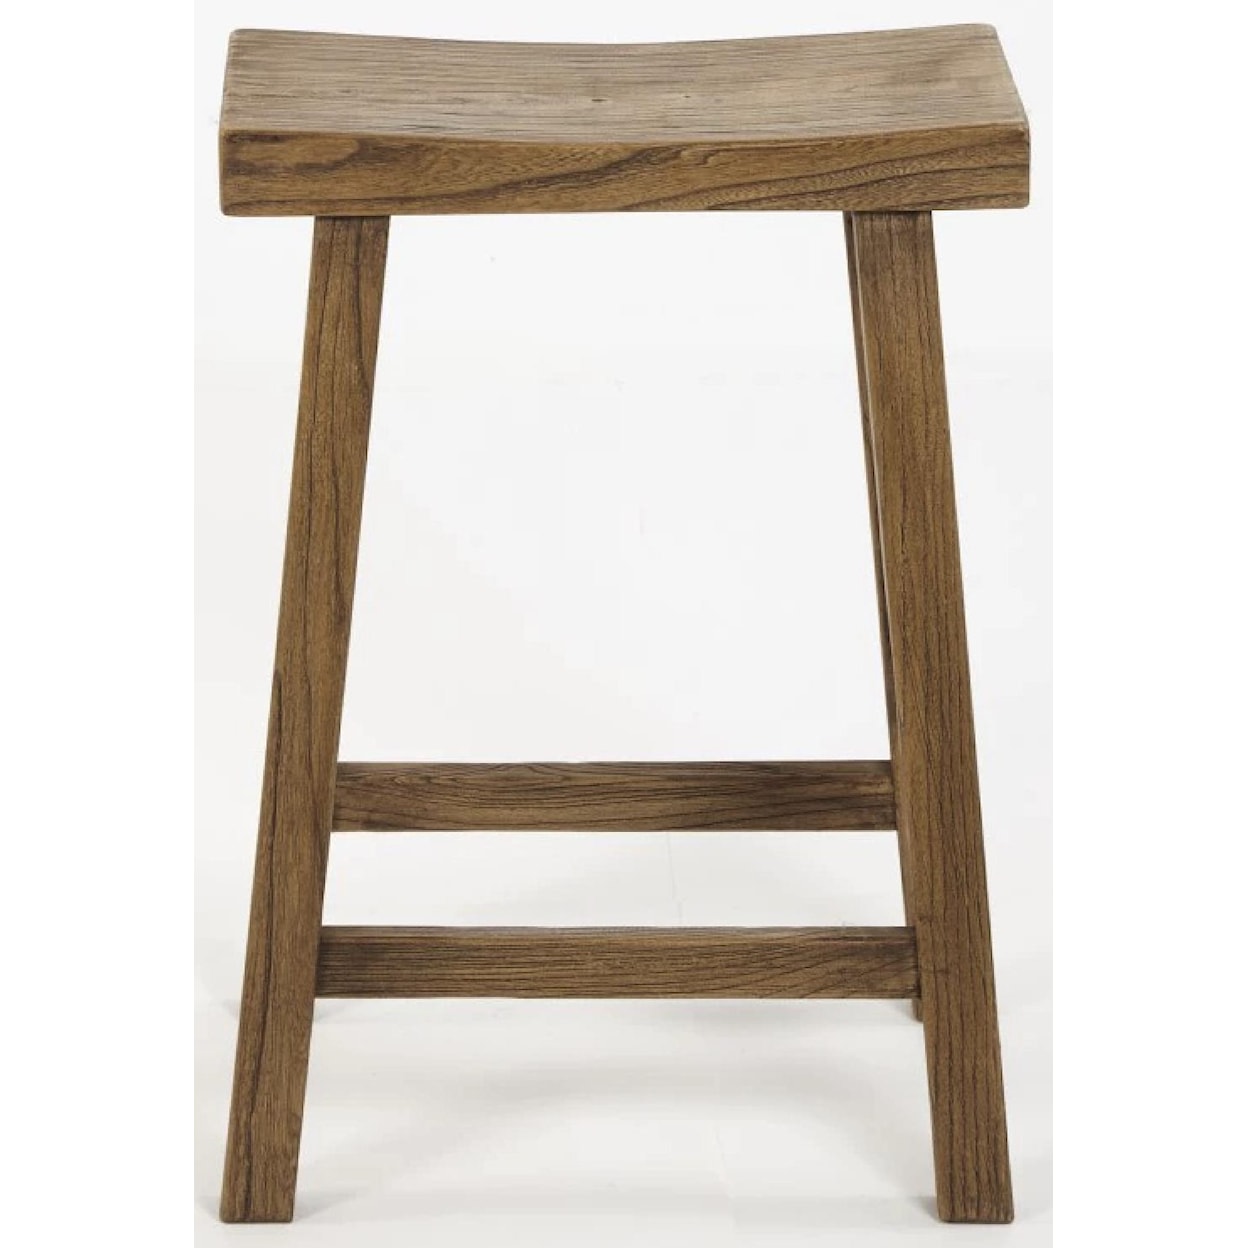 Nest Home Collections Katie Katie Counter Stool